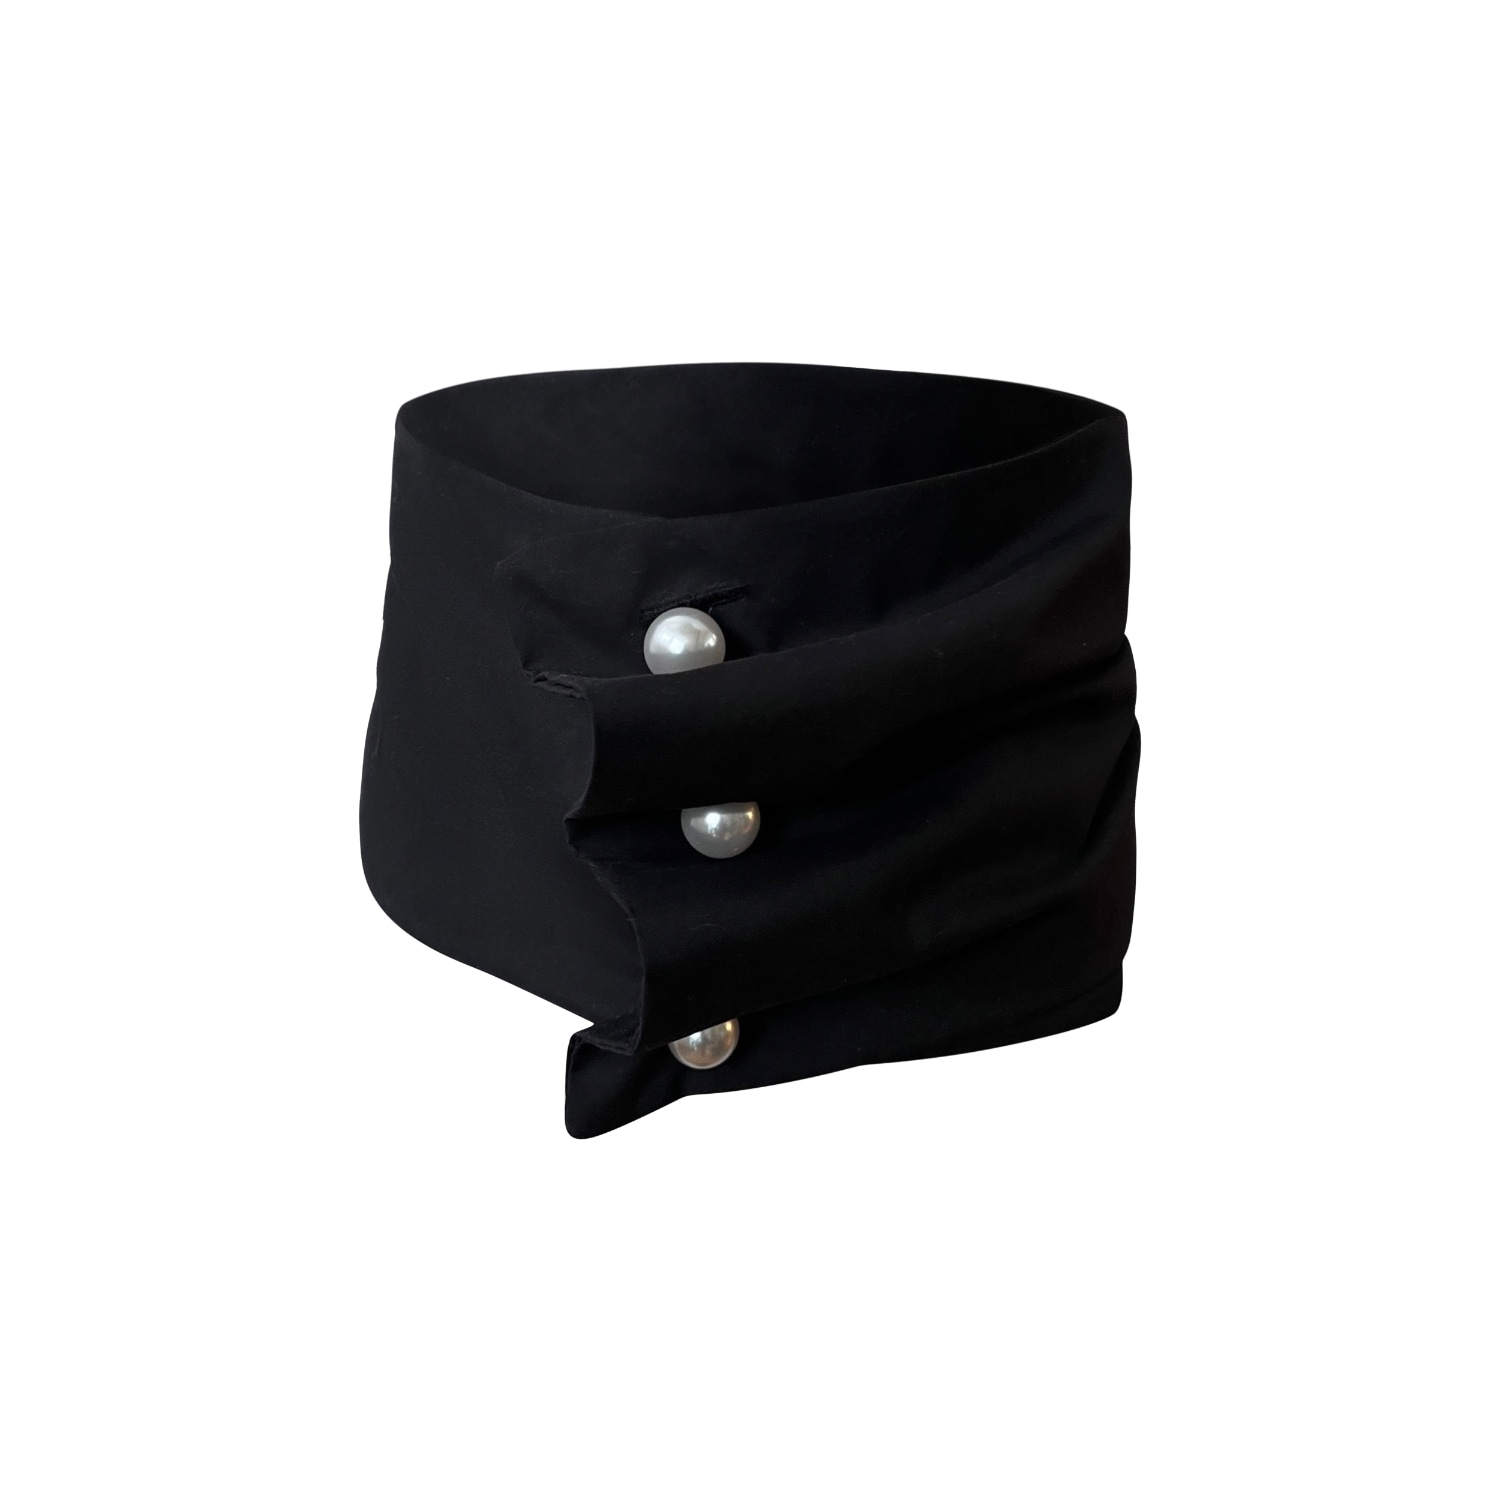 Women’s Black Wide Asymmetrical Belt With Pearl Buttons 28" London Atelier Byproduct